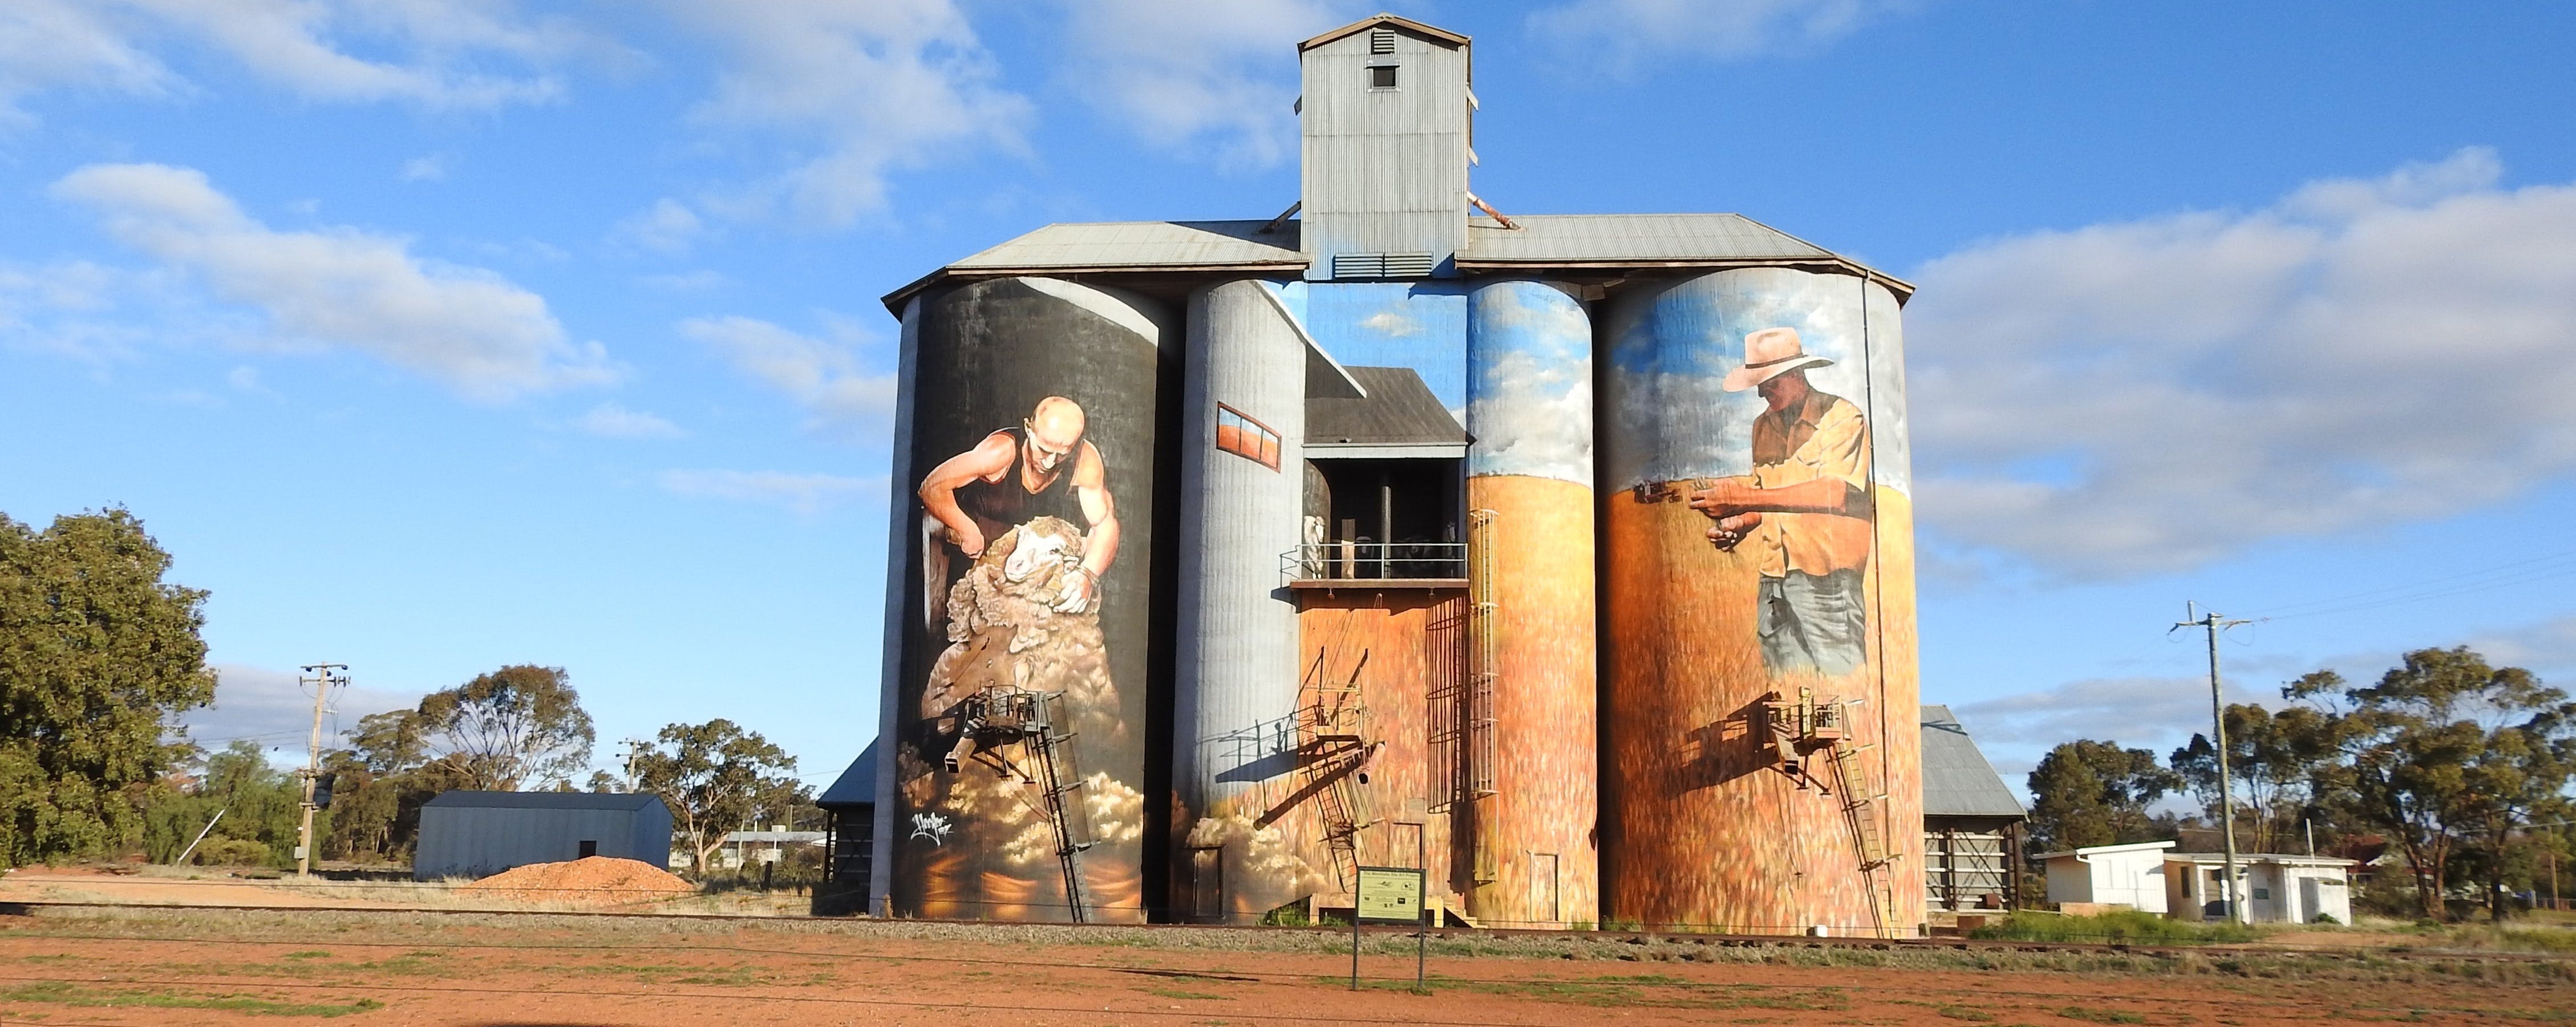 Riverina Outdoor Art Trail - Northern Rivers Accommodation